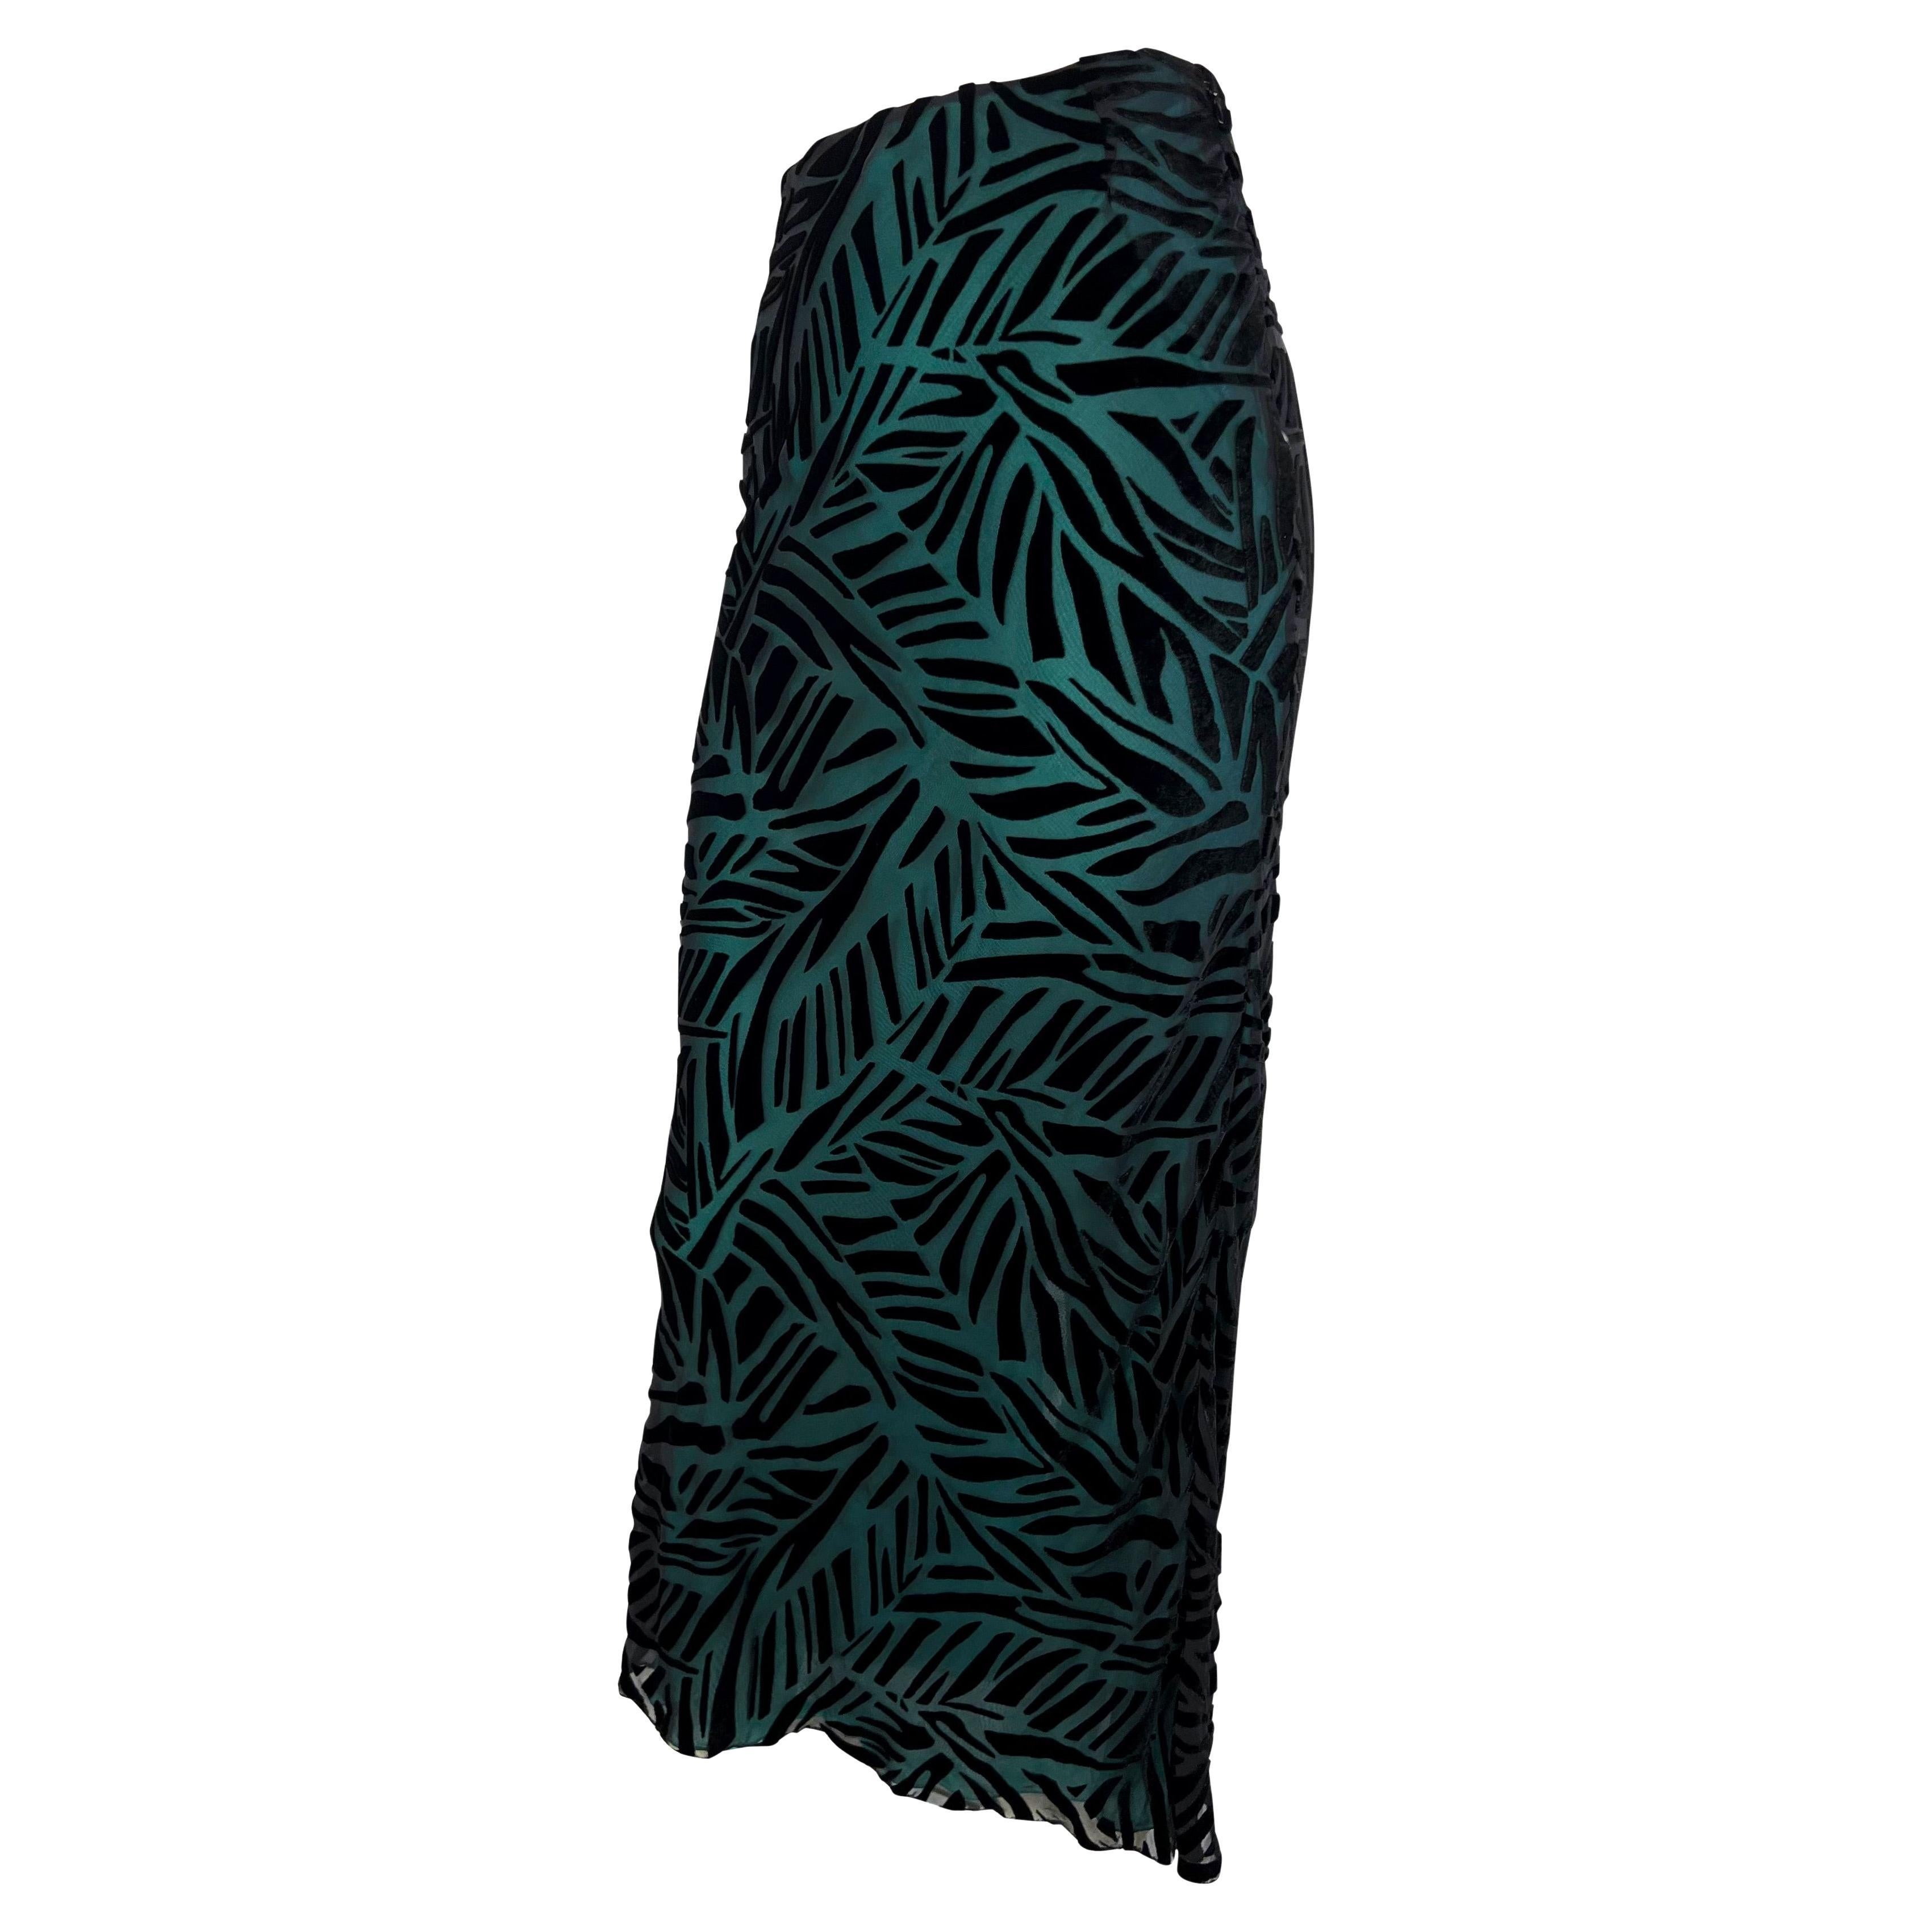 F/W 1999 Gianni Versace by Donatella Turquoise Sheer Black Velvet Maxi Skirt In Excellent Condition For Sale In West Hollywood, CA